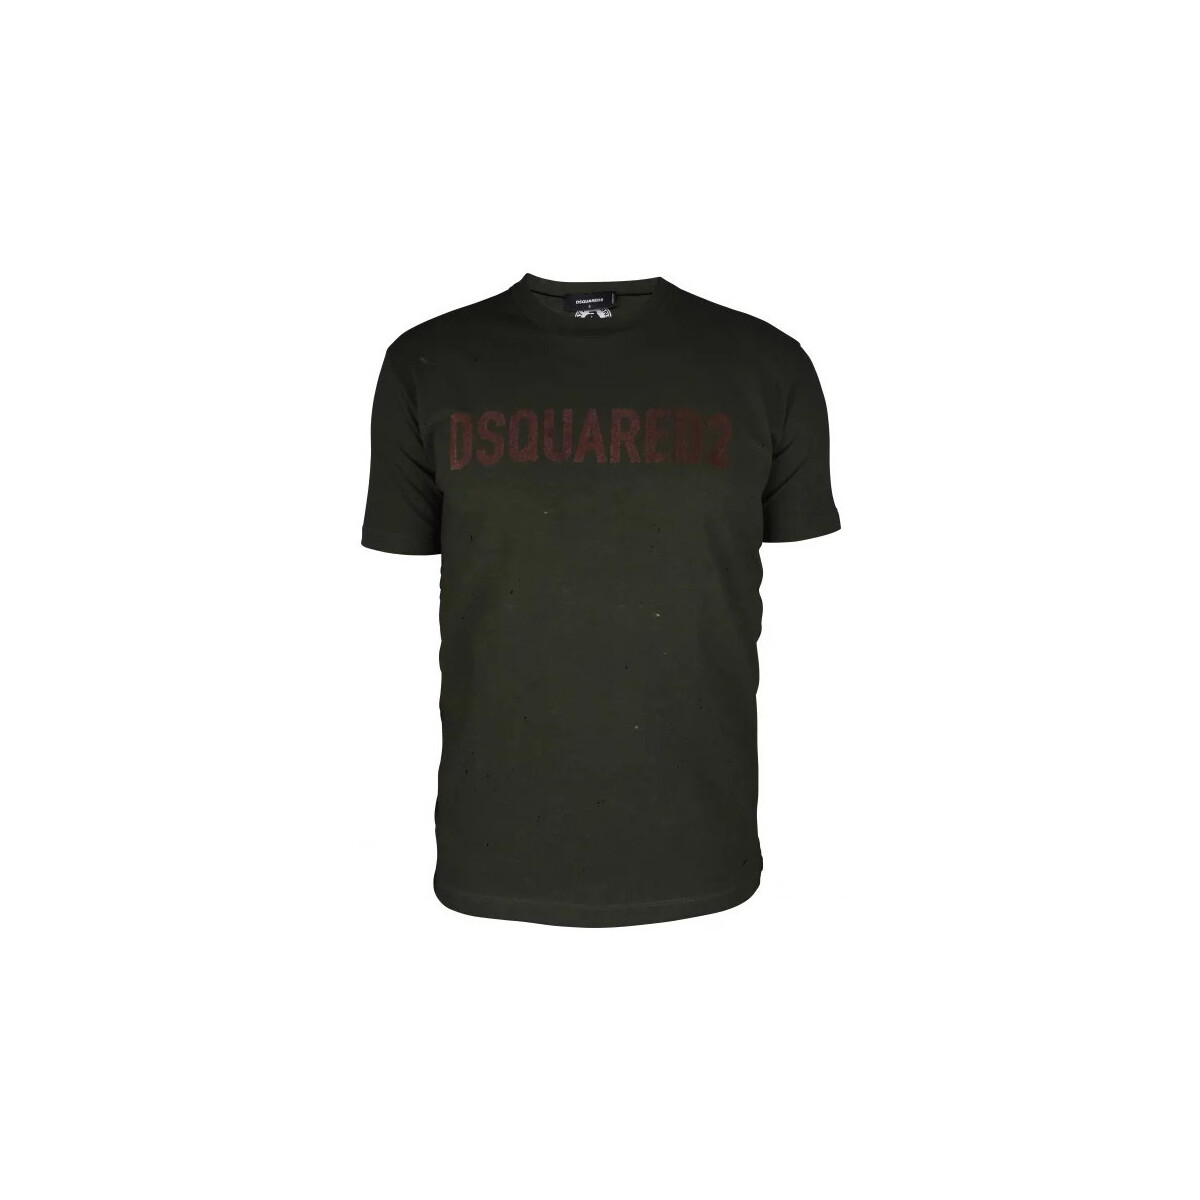 Textiel Heren T-shirts & Polo’s Dsquared  Groen